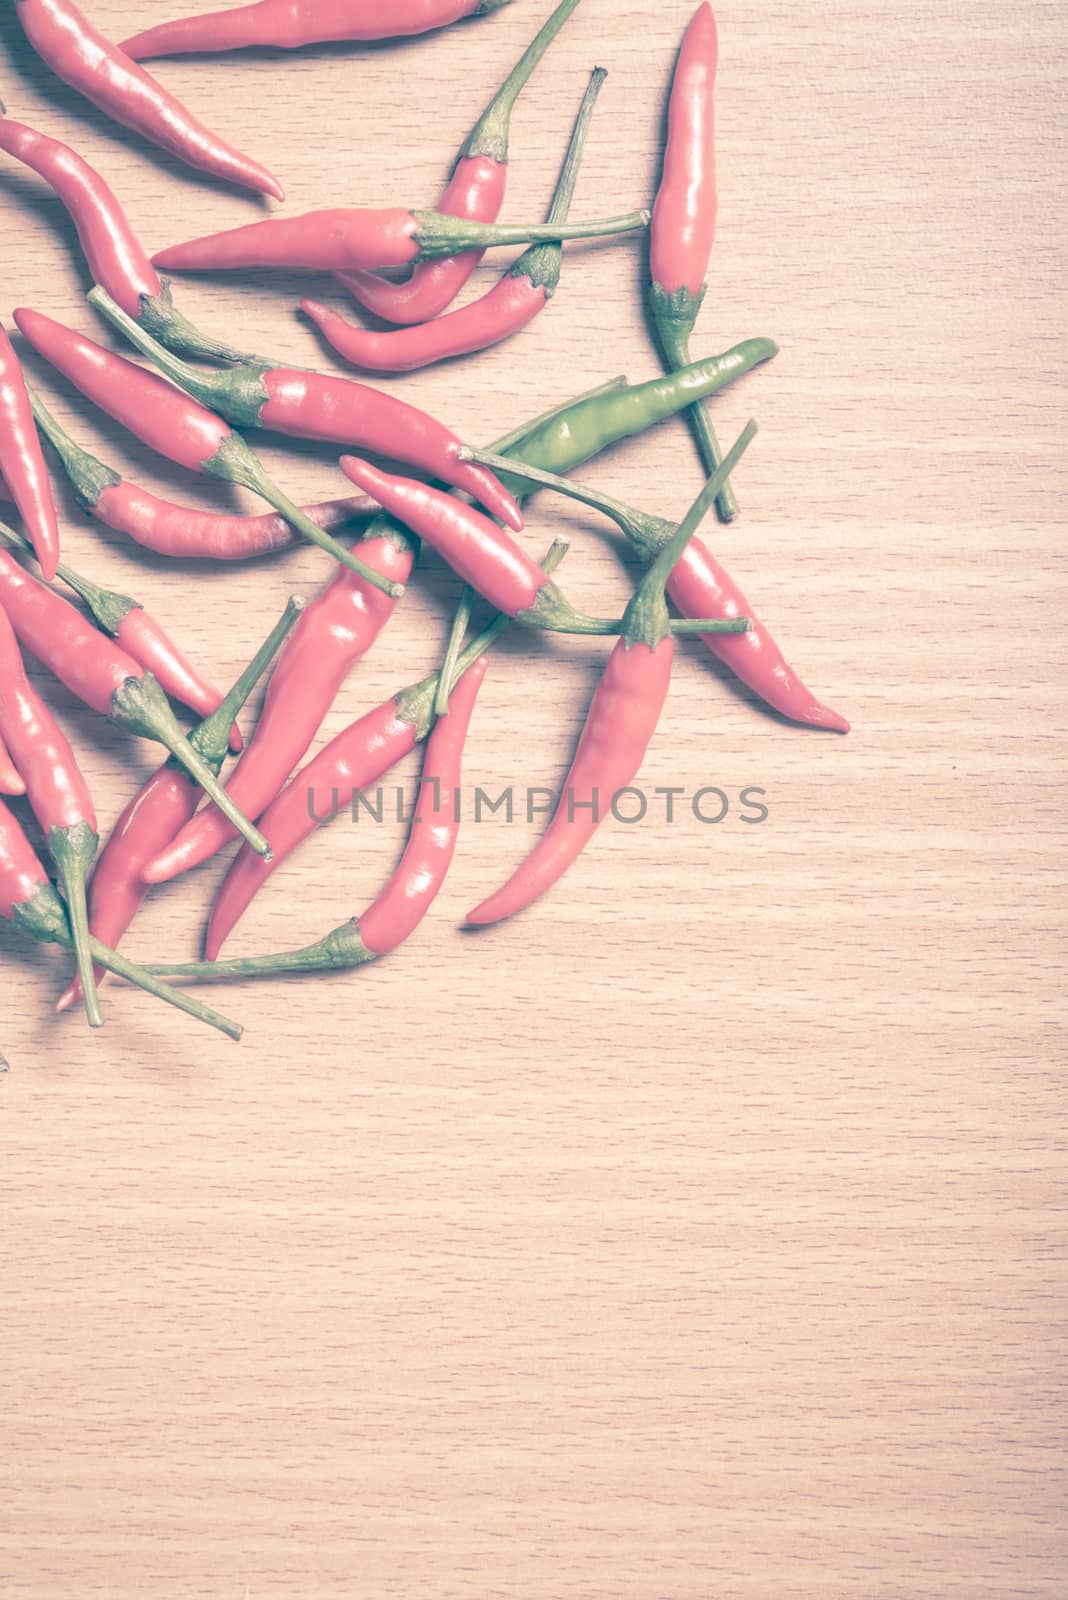 red chili peppers vintage style by ammza12